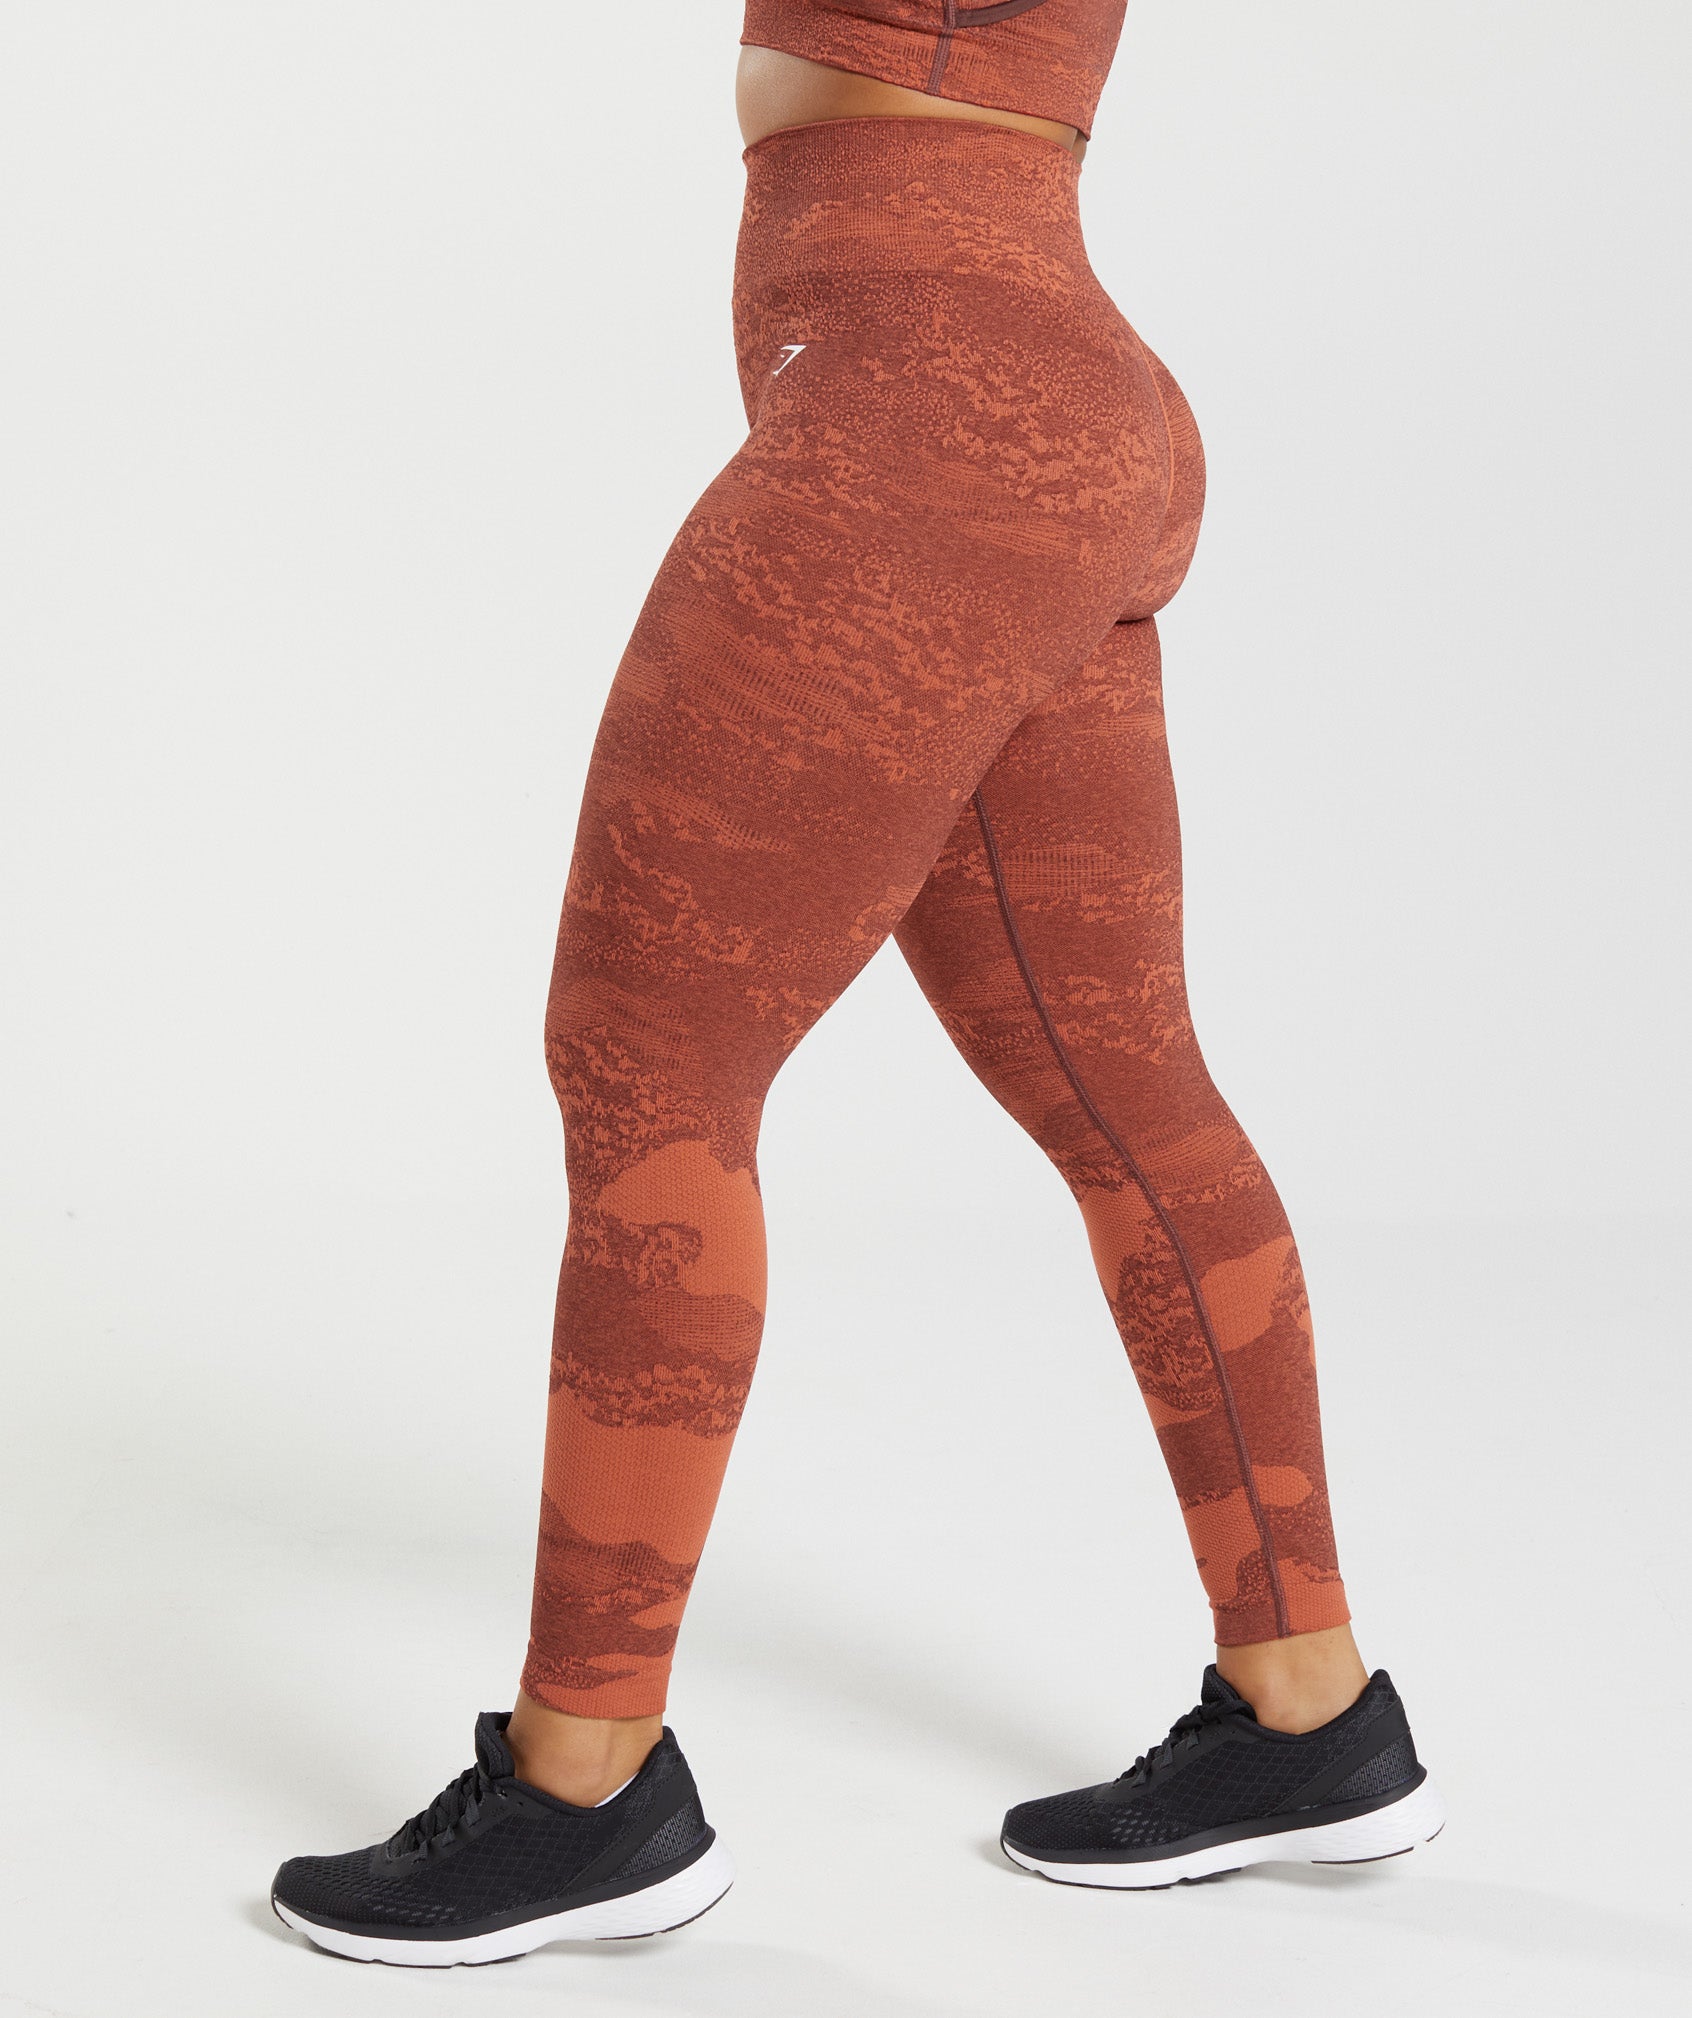 Adapt Camo Seamless Leggings in Storm Red/Cherry Brown - view 3